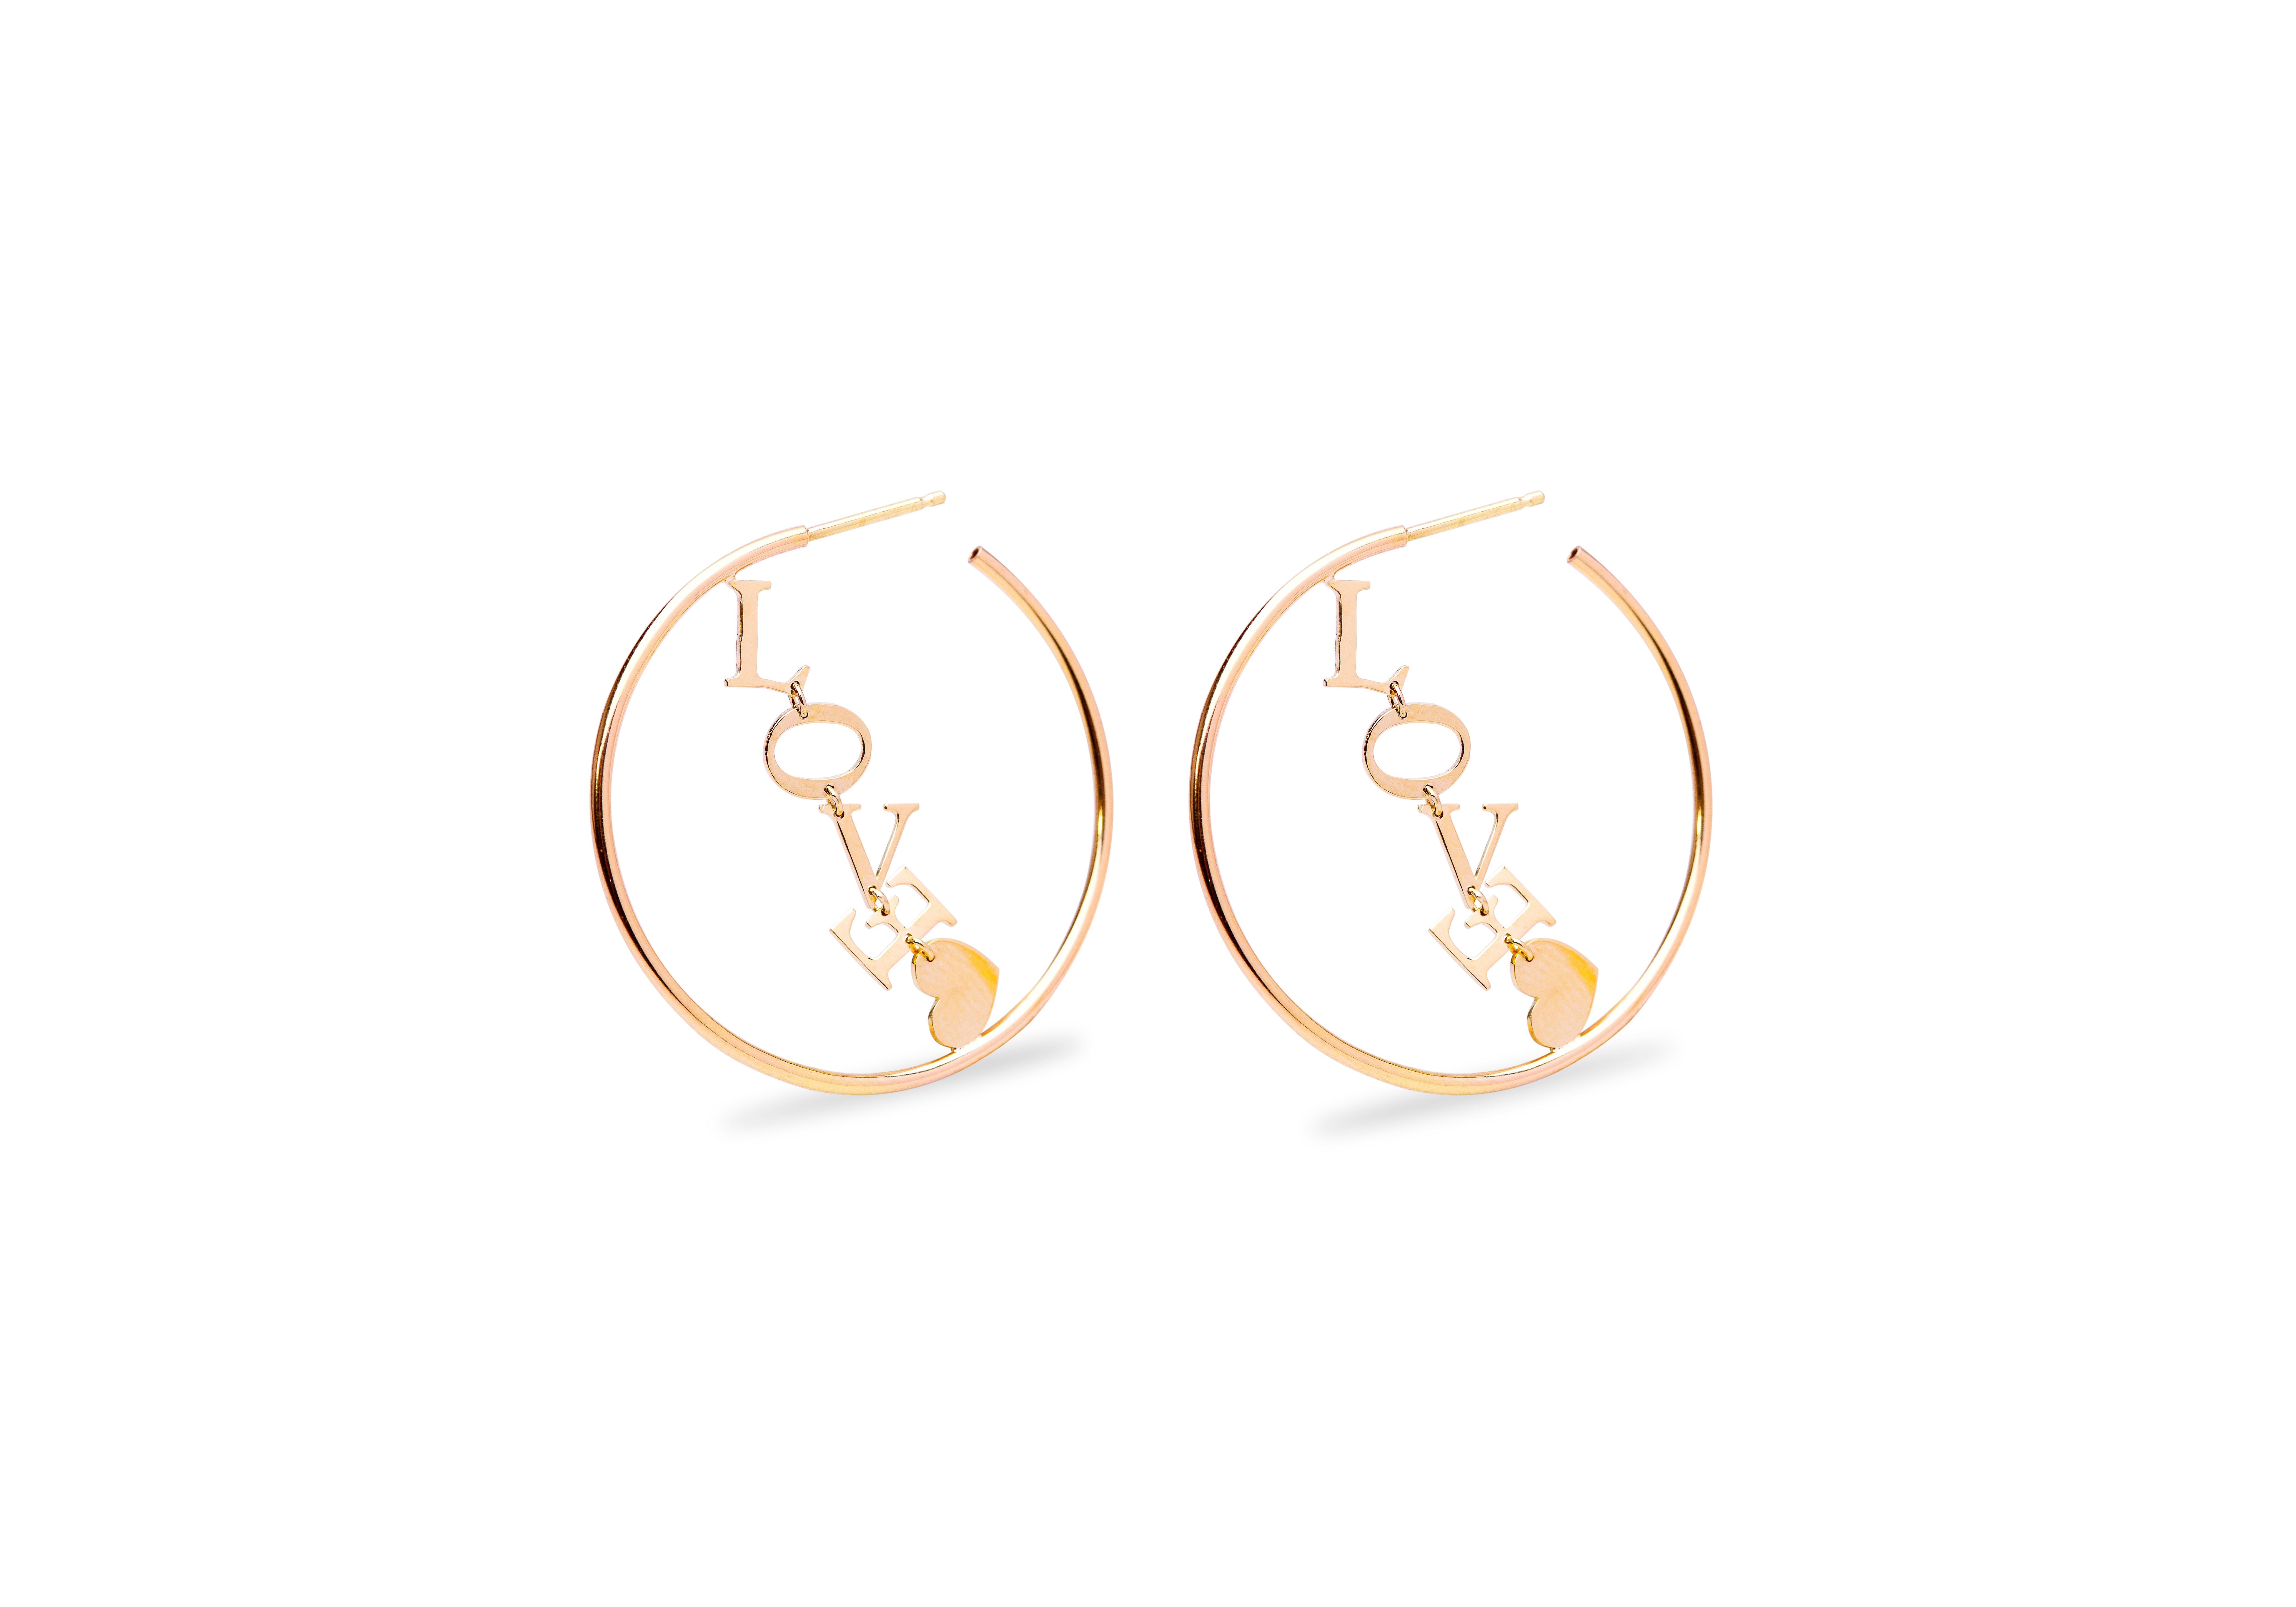 Love 18K Yellow Gold Letters Circle Hoops Handcrafted Design Earrings For Sale 2